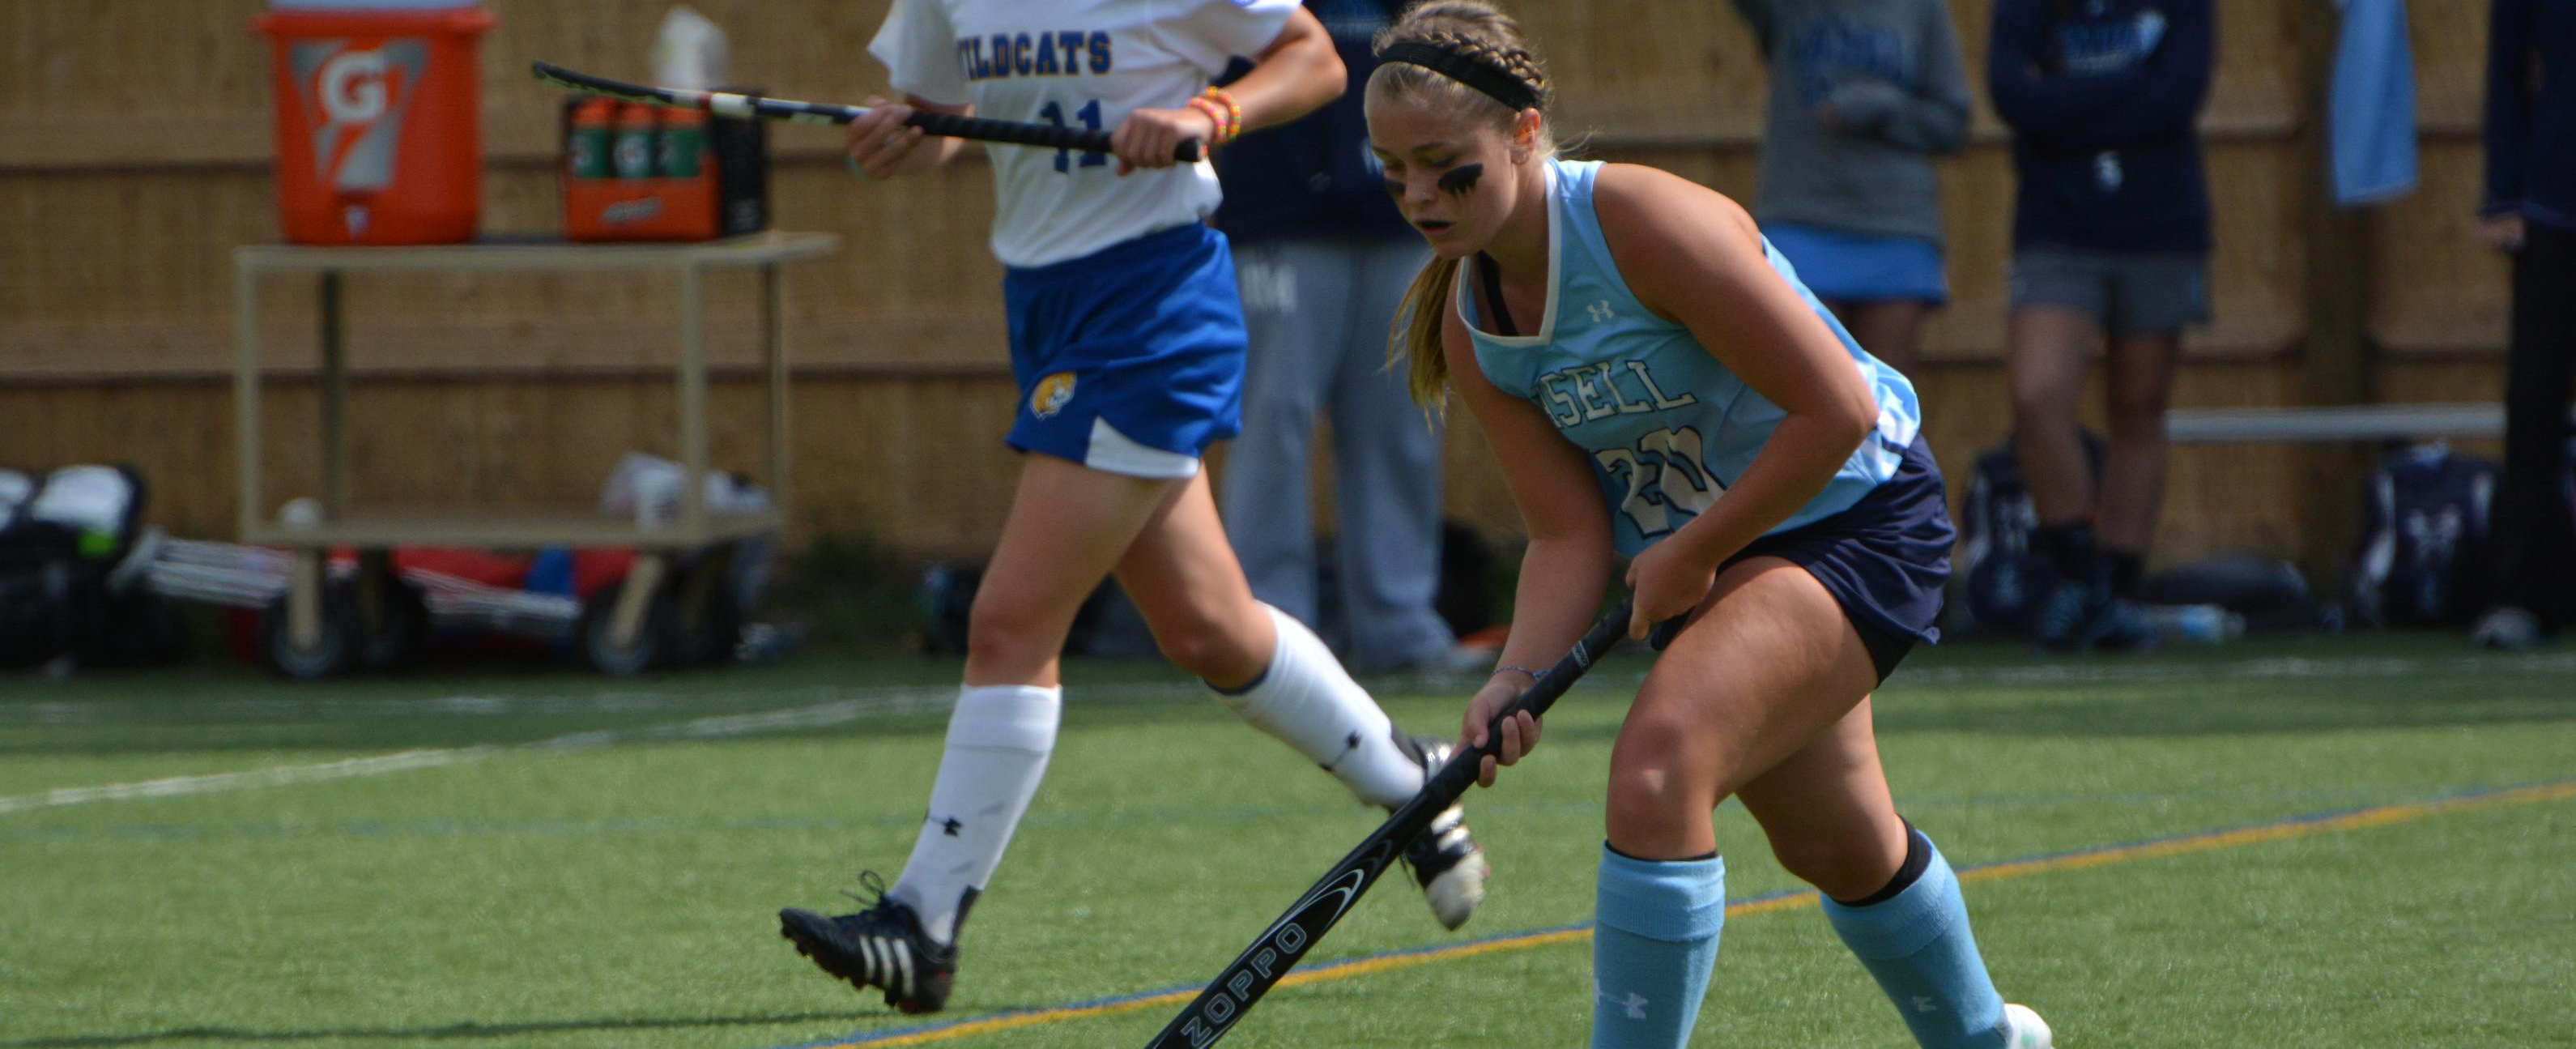 Field Hockey Shuts Out Becker College 3-0